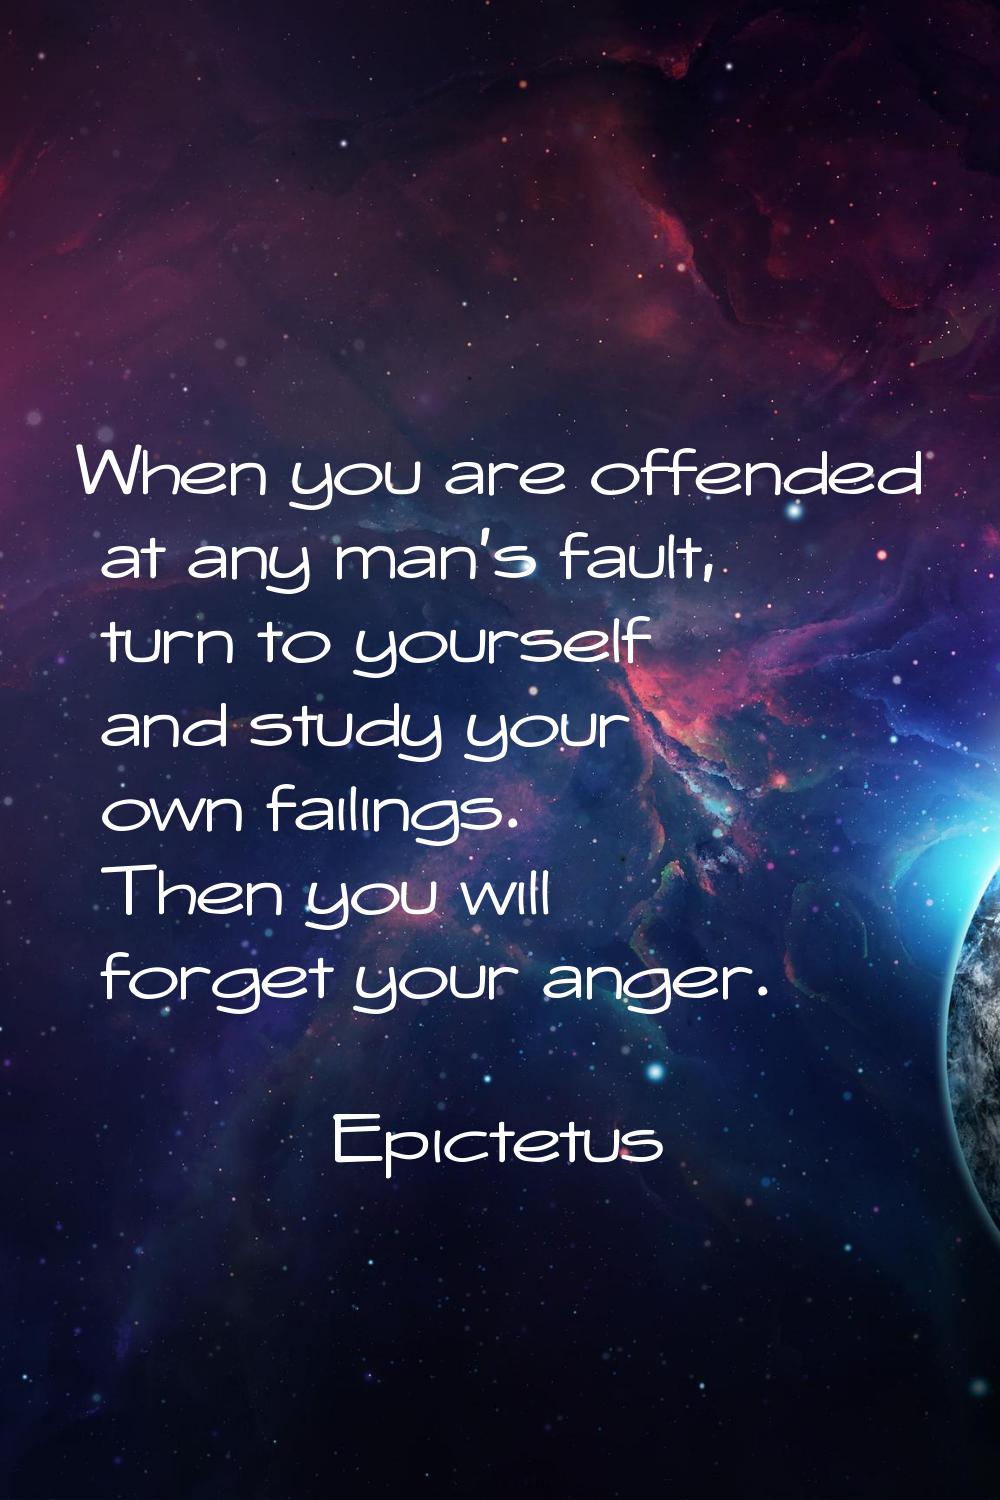 When you are offended at any man's fault, turn to yourself and study your own failings. Then you wi